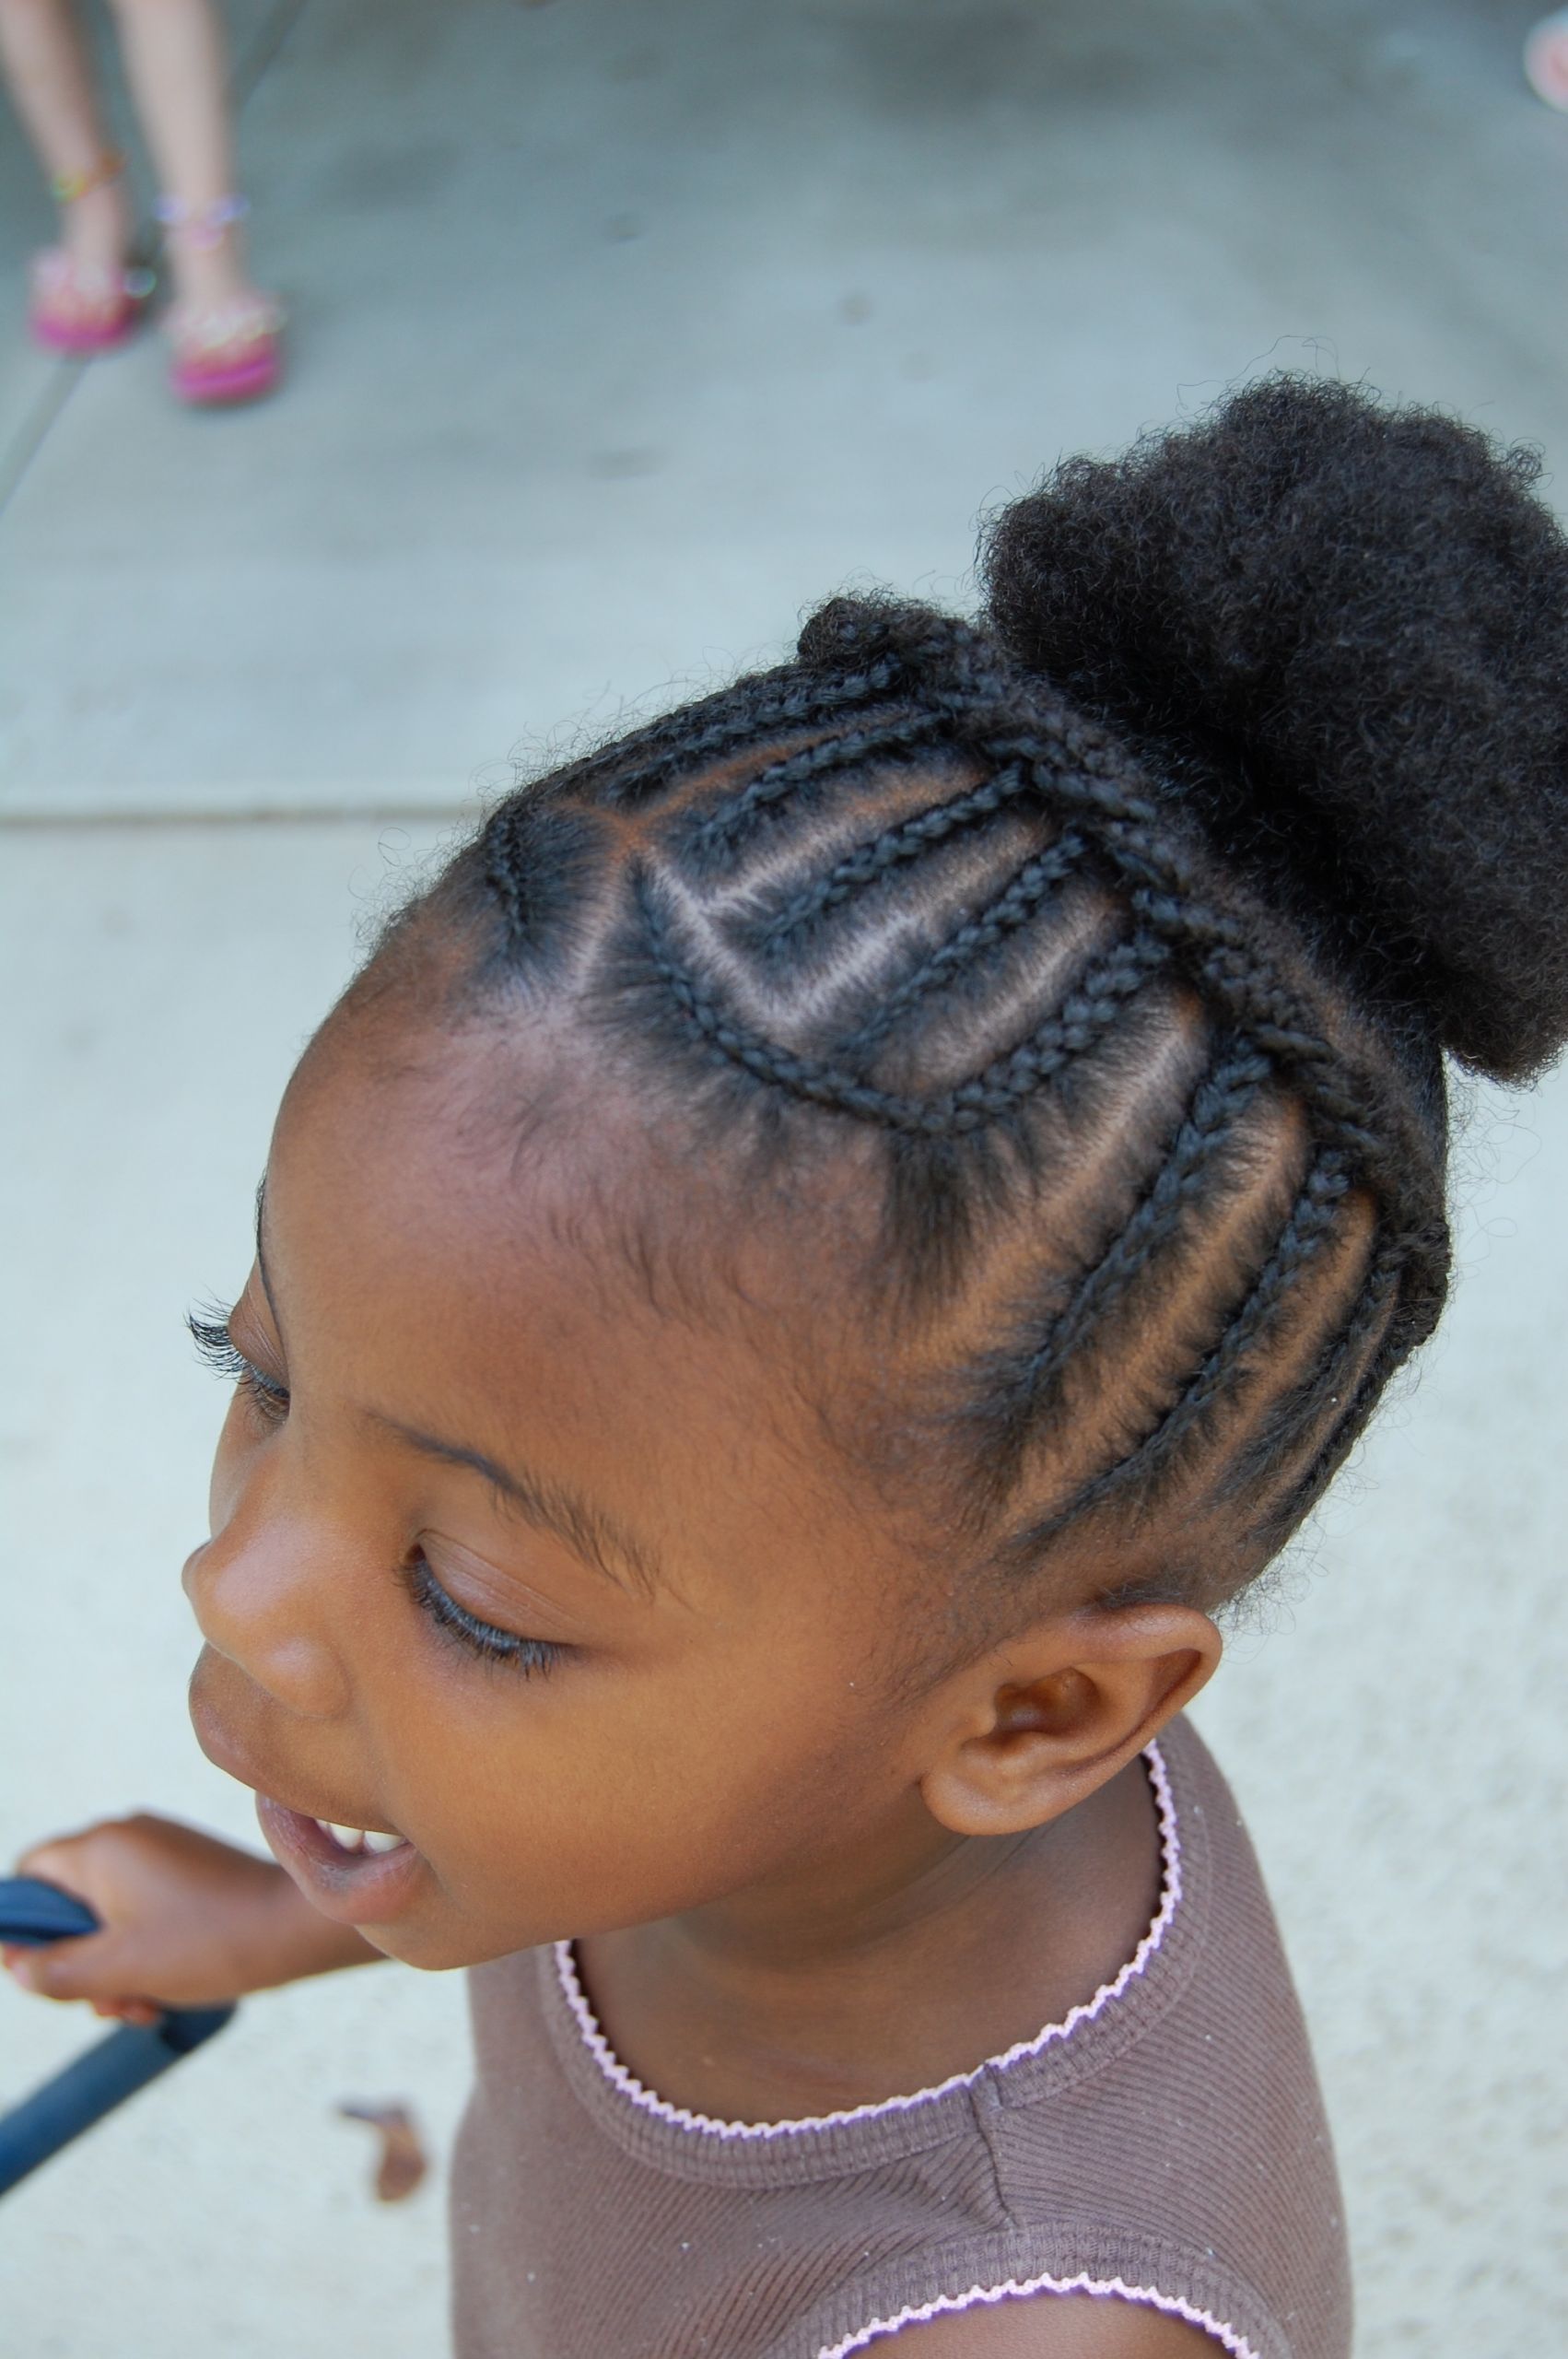 7 Year Old Black Girl Hairstyles
 10 best hairstyles for 10 year old black girls 2017